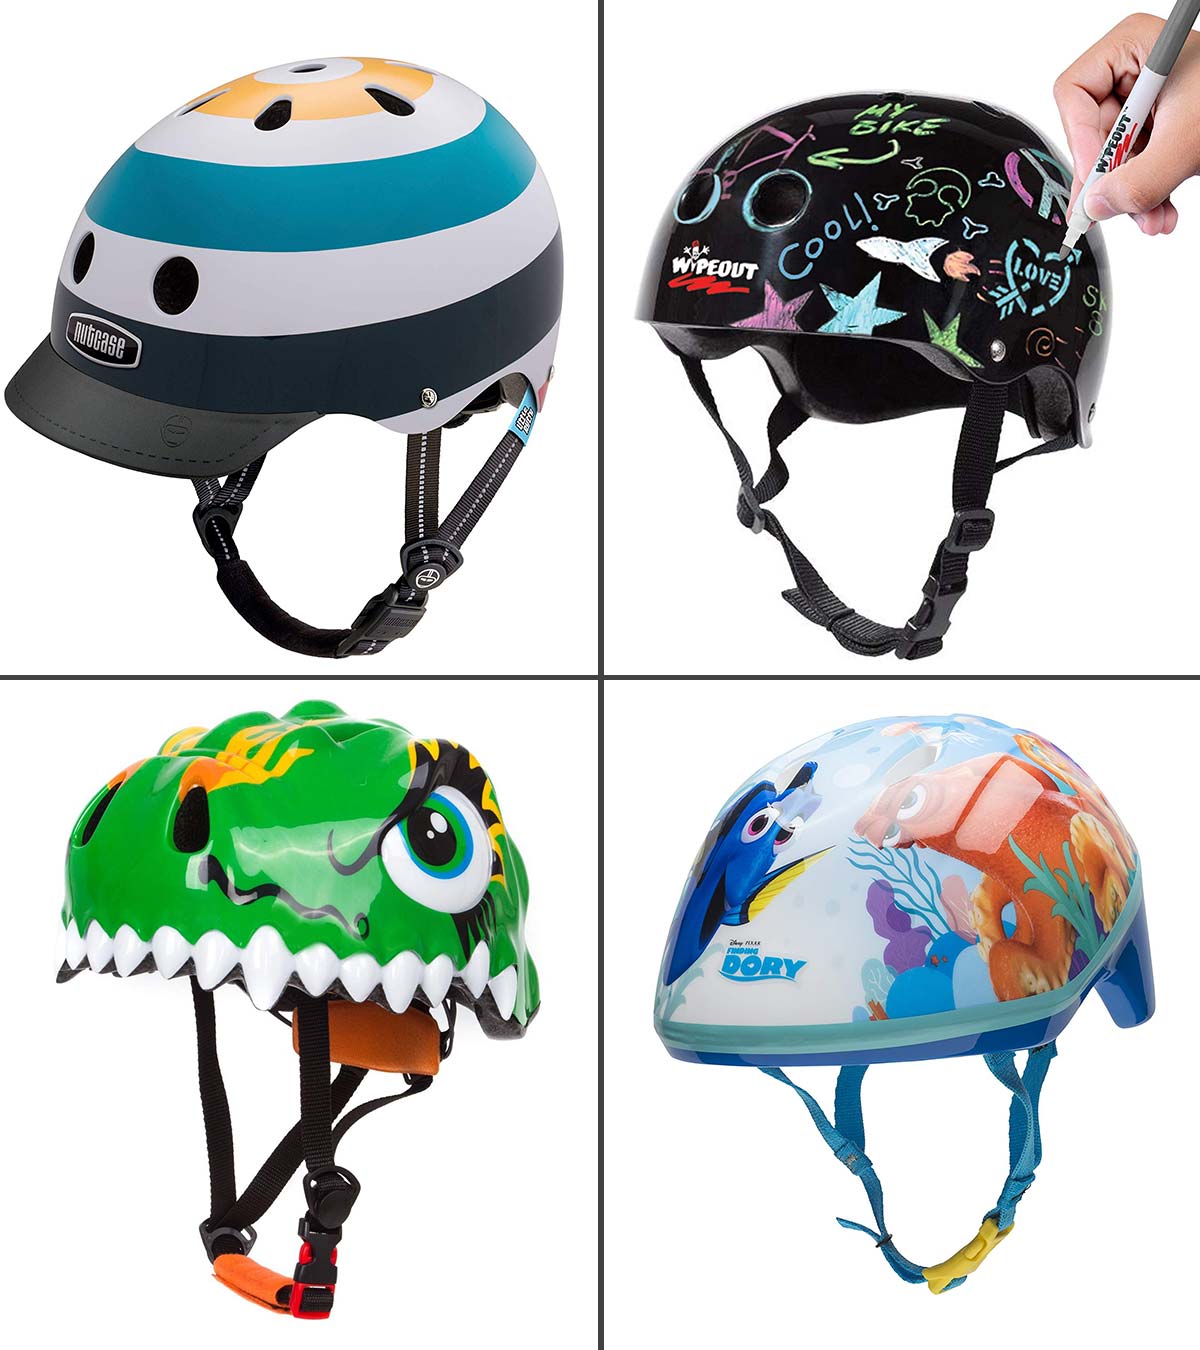 Adjustable Size Headband Options For Kids Aged 4-11 Years Old 6 Awesome Designs 3StyleScooters® SafetyMAX® Kids Cycle Helmet Perfect for Cycling and Scooting 